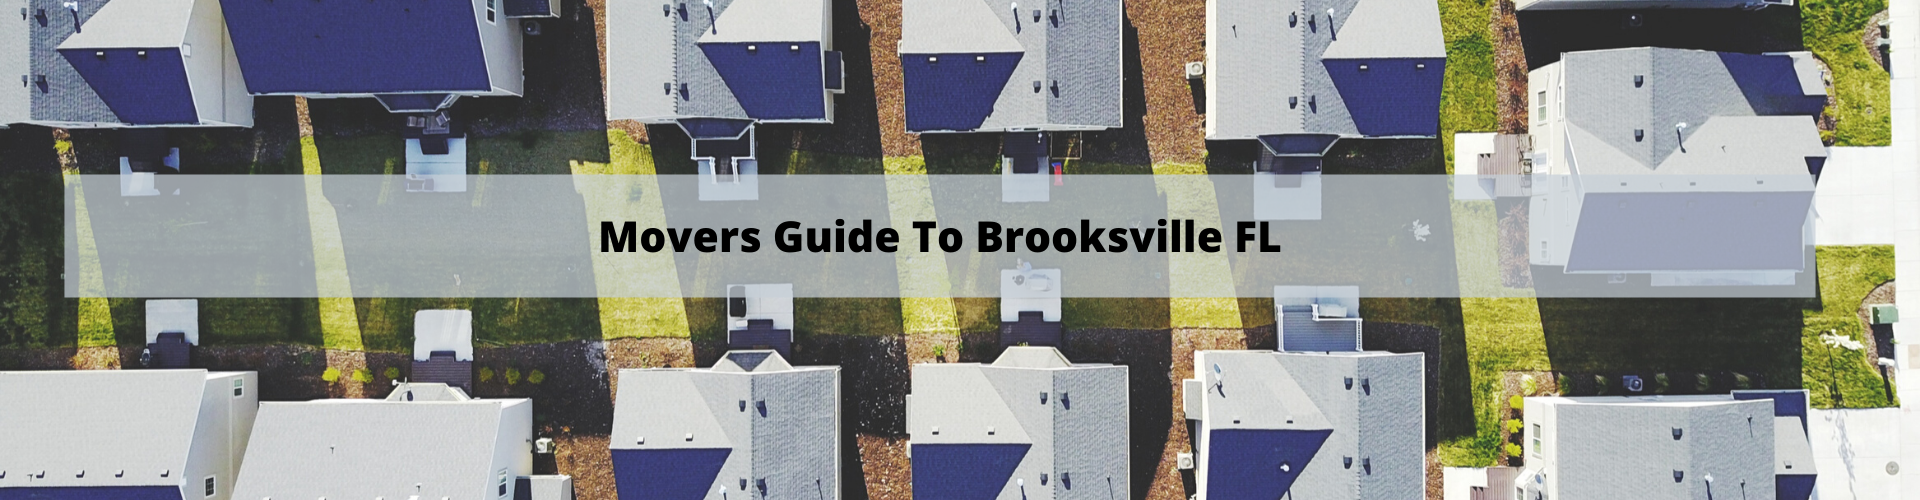 Movers Guide To Brooksville FL